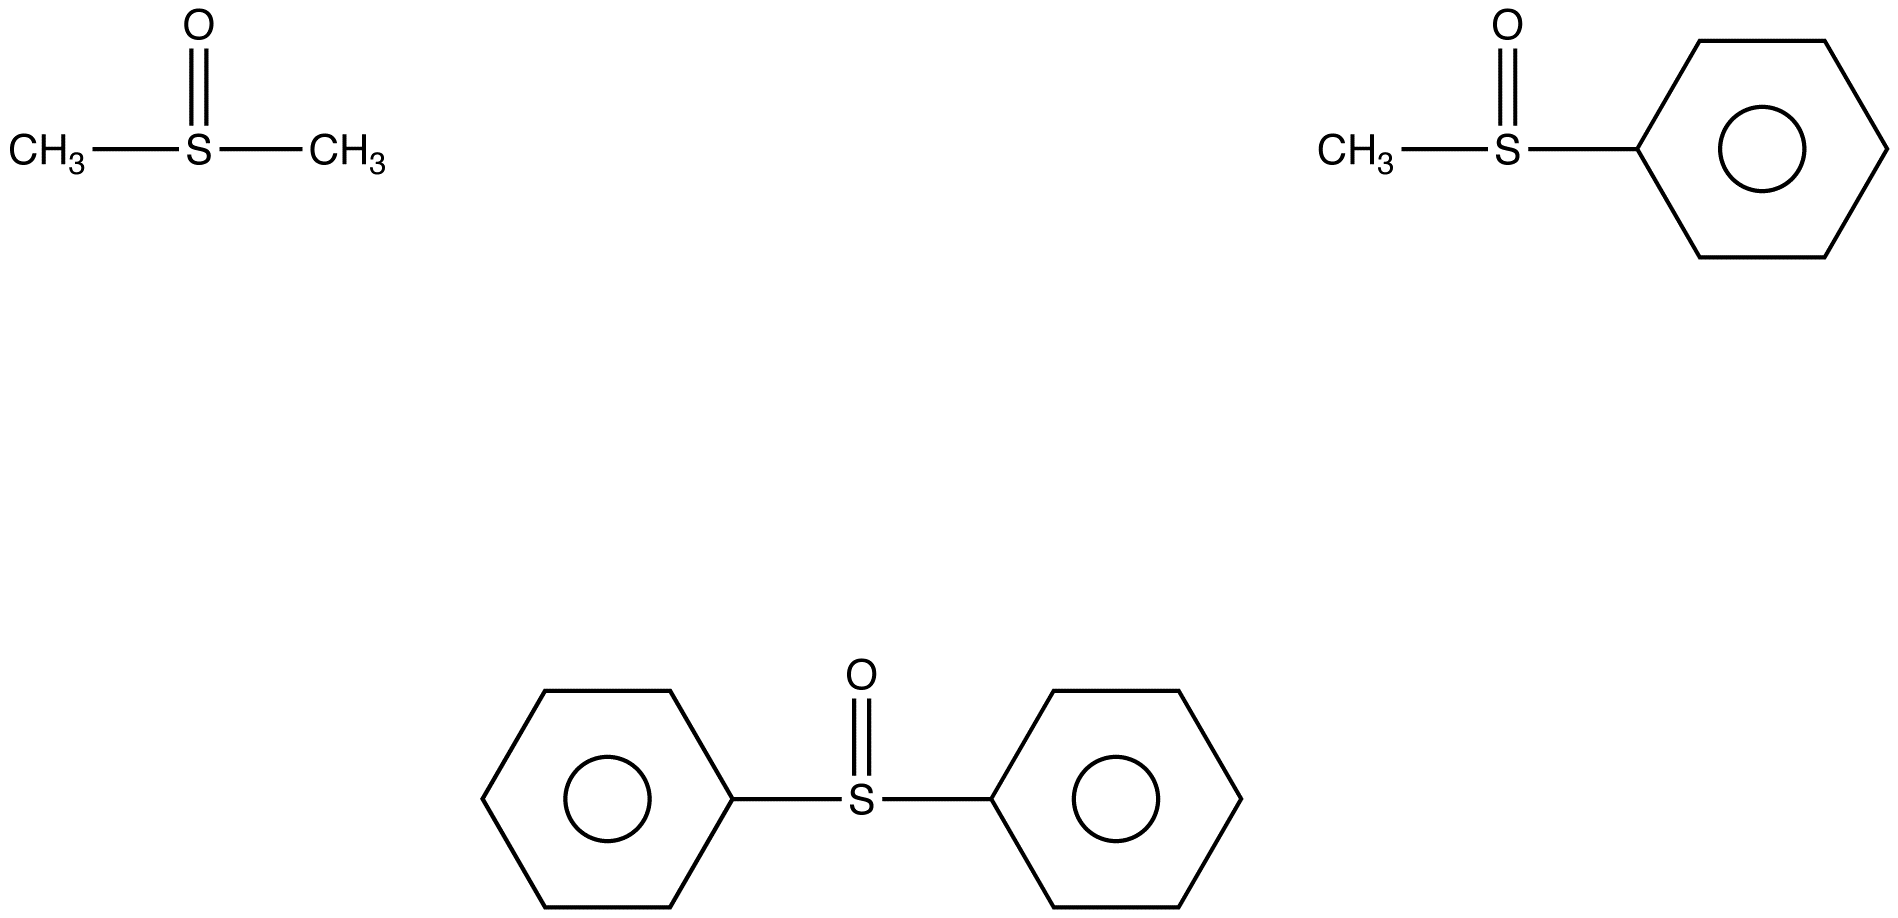 sulfoxide2.png